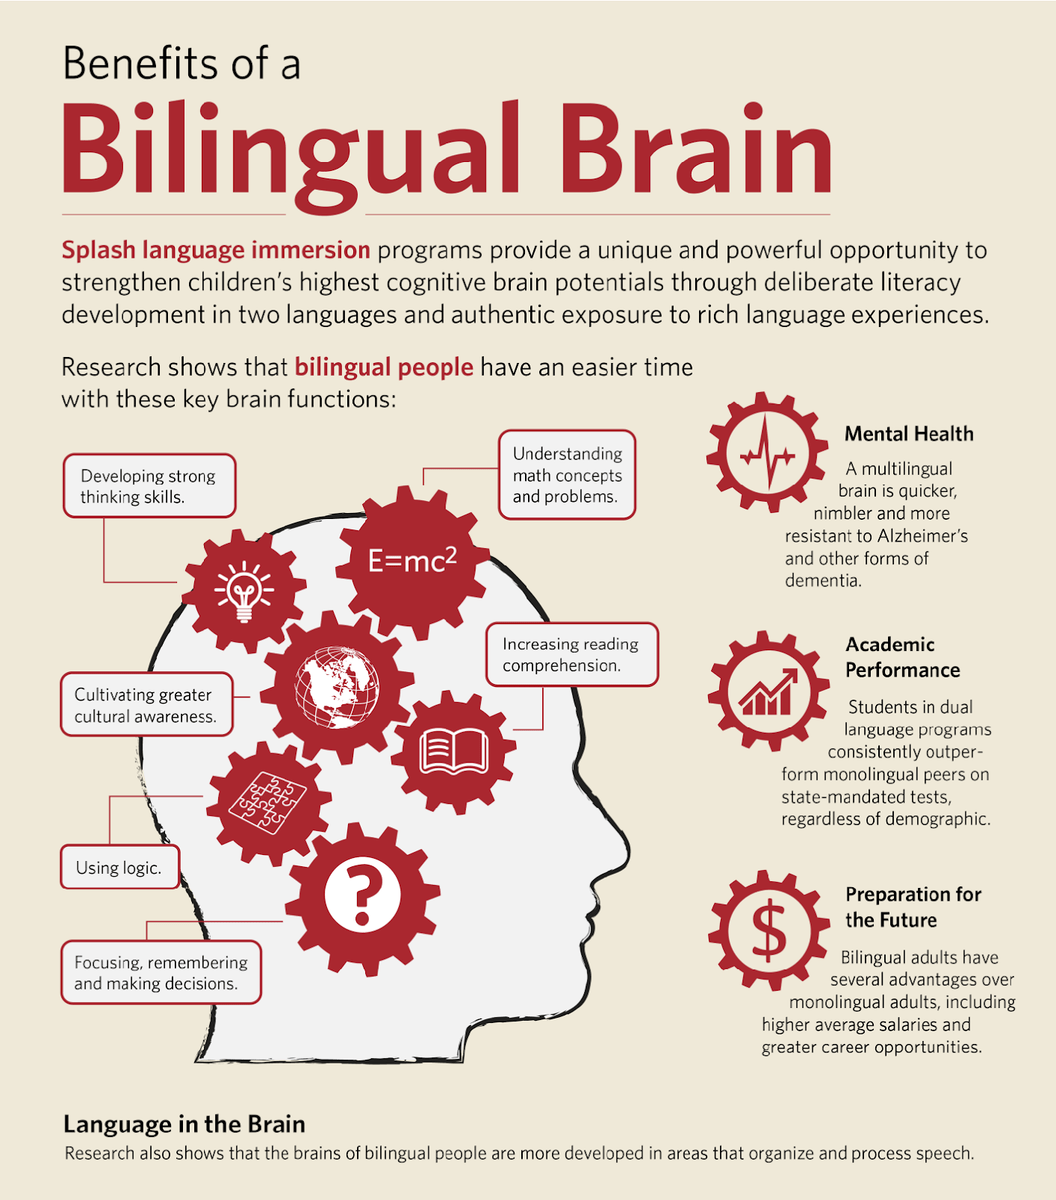 A chart showing all the benefits of a bilingual brain